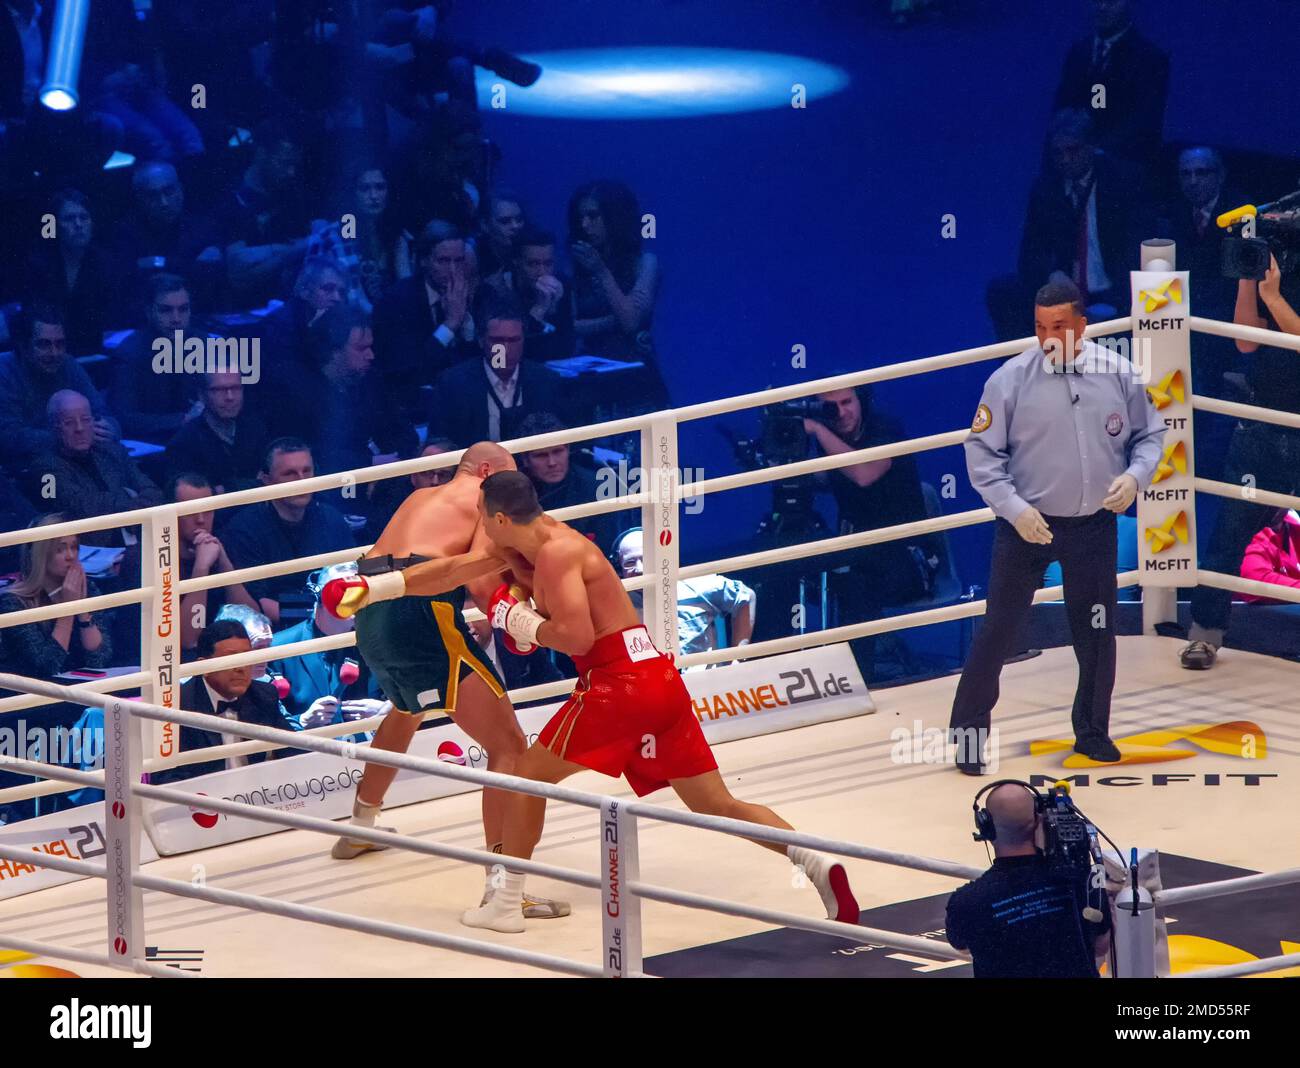 28-11-2015 Dusseldorf Germany.  Wladimir Klitschko throws a powerful straight right hand but Tyson but Tyson Fury manages to get away and slip Stock Photo